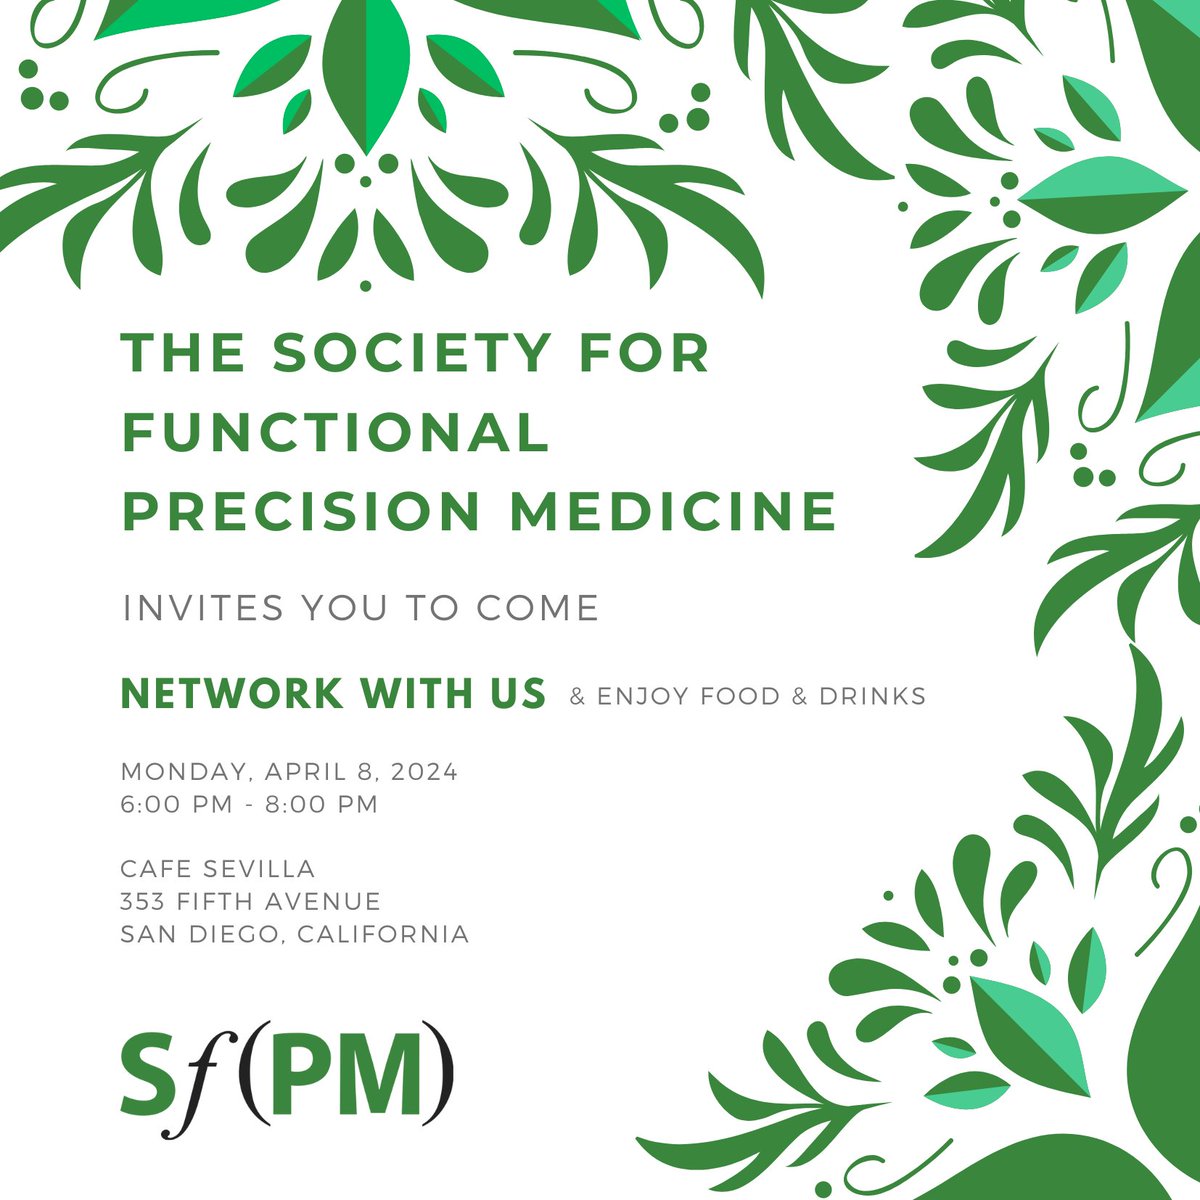 The annual #AACR24 meeting is about to start. The Society for Functional Precision Medicine will be hosting a reception on Monday, April 8th from 6-8pm. Come network with us! with Don't forget to RSVP today to secure your spot sfpm.io